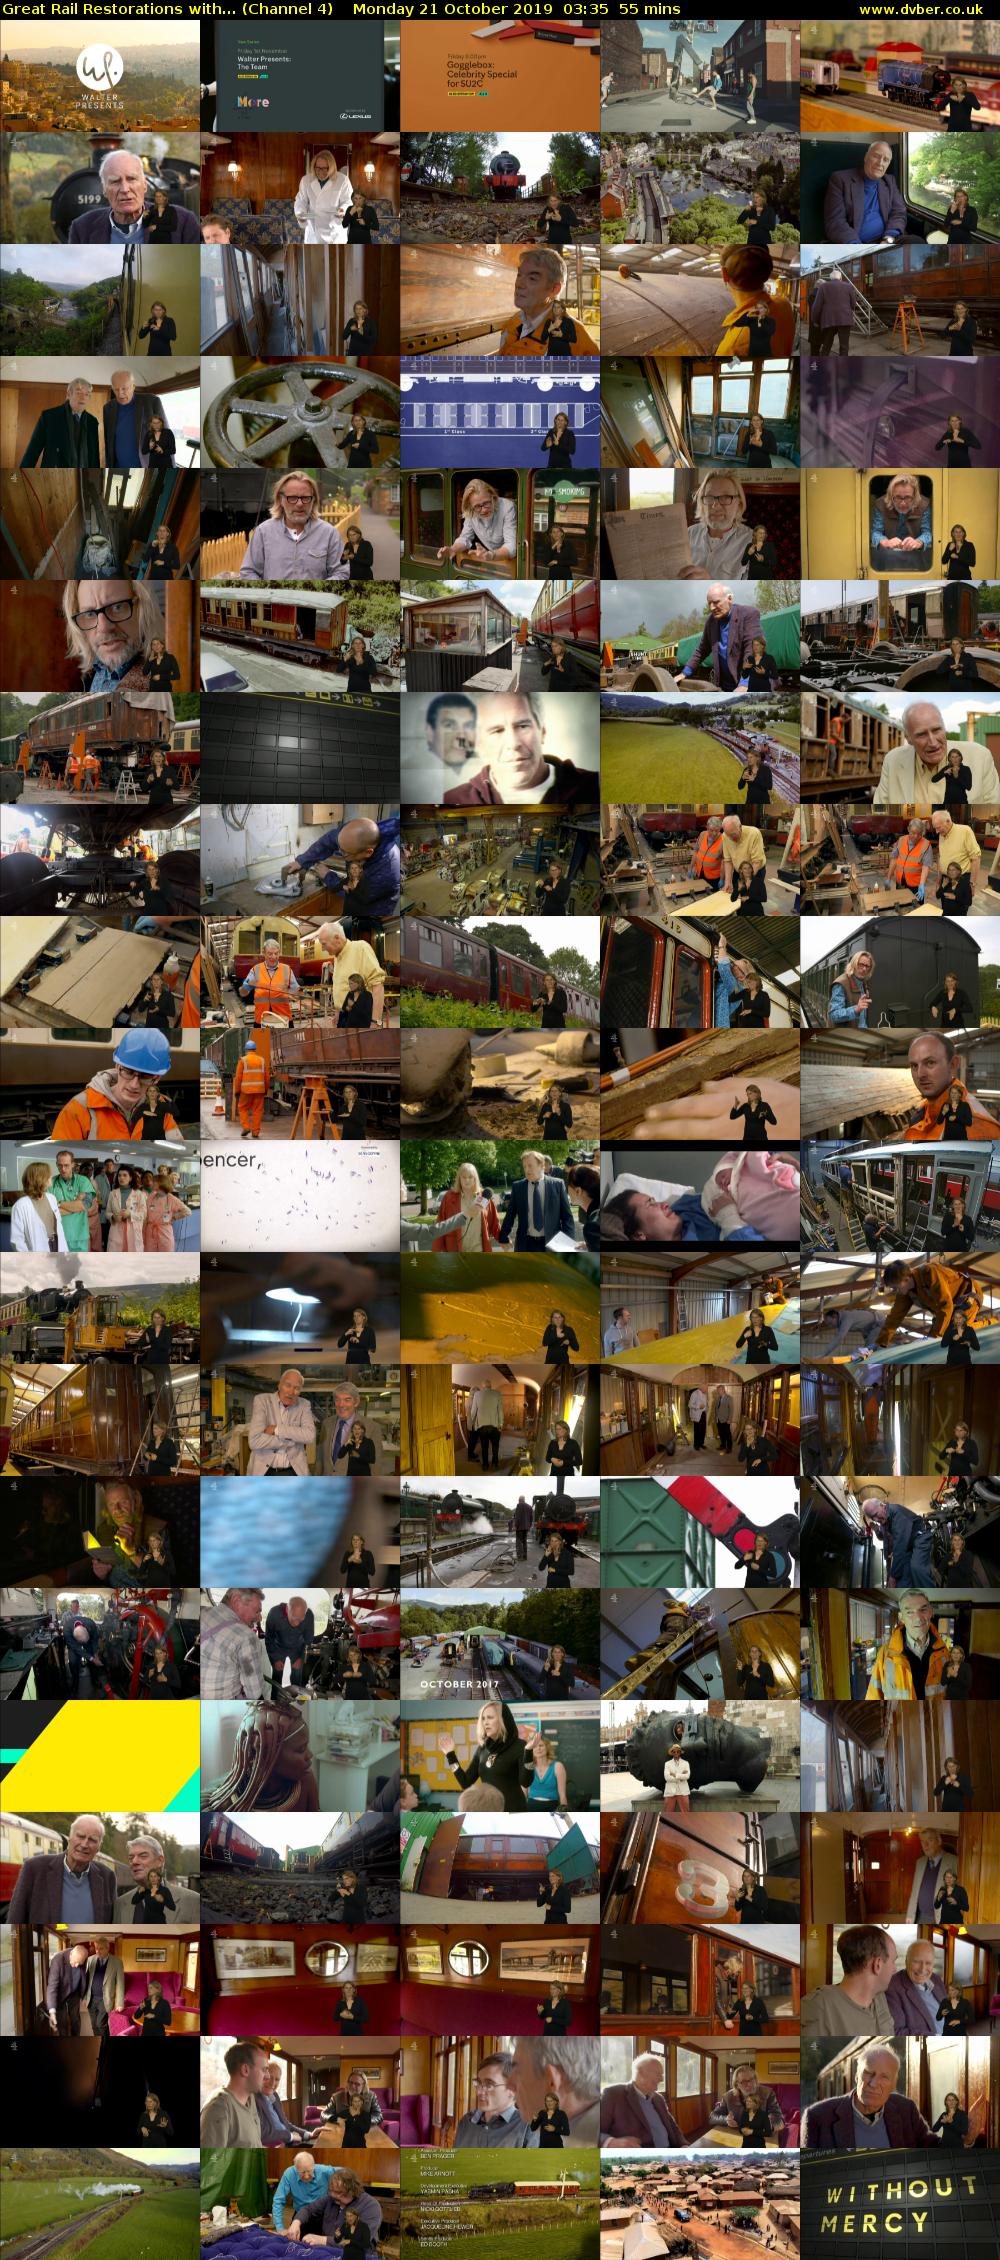 Great Rail Restorations with... (Channel 4) Monday 21 October 2019 03:35 - 04:30